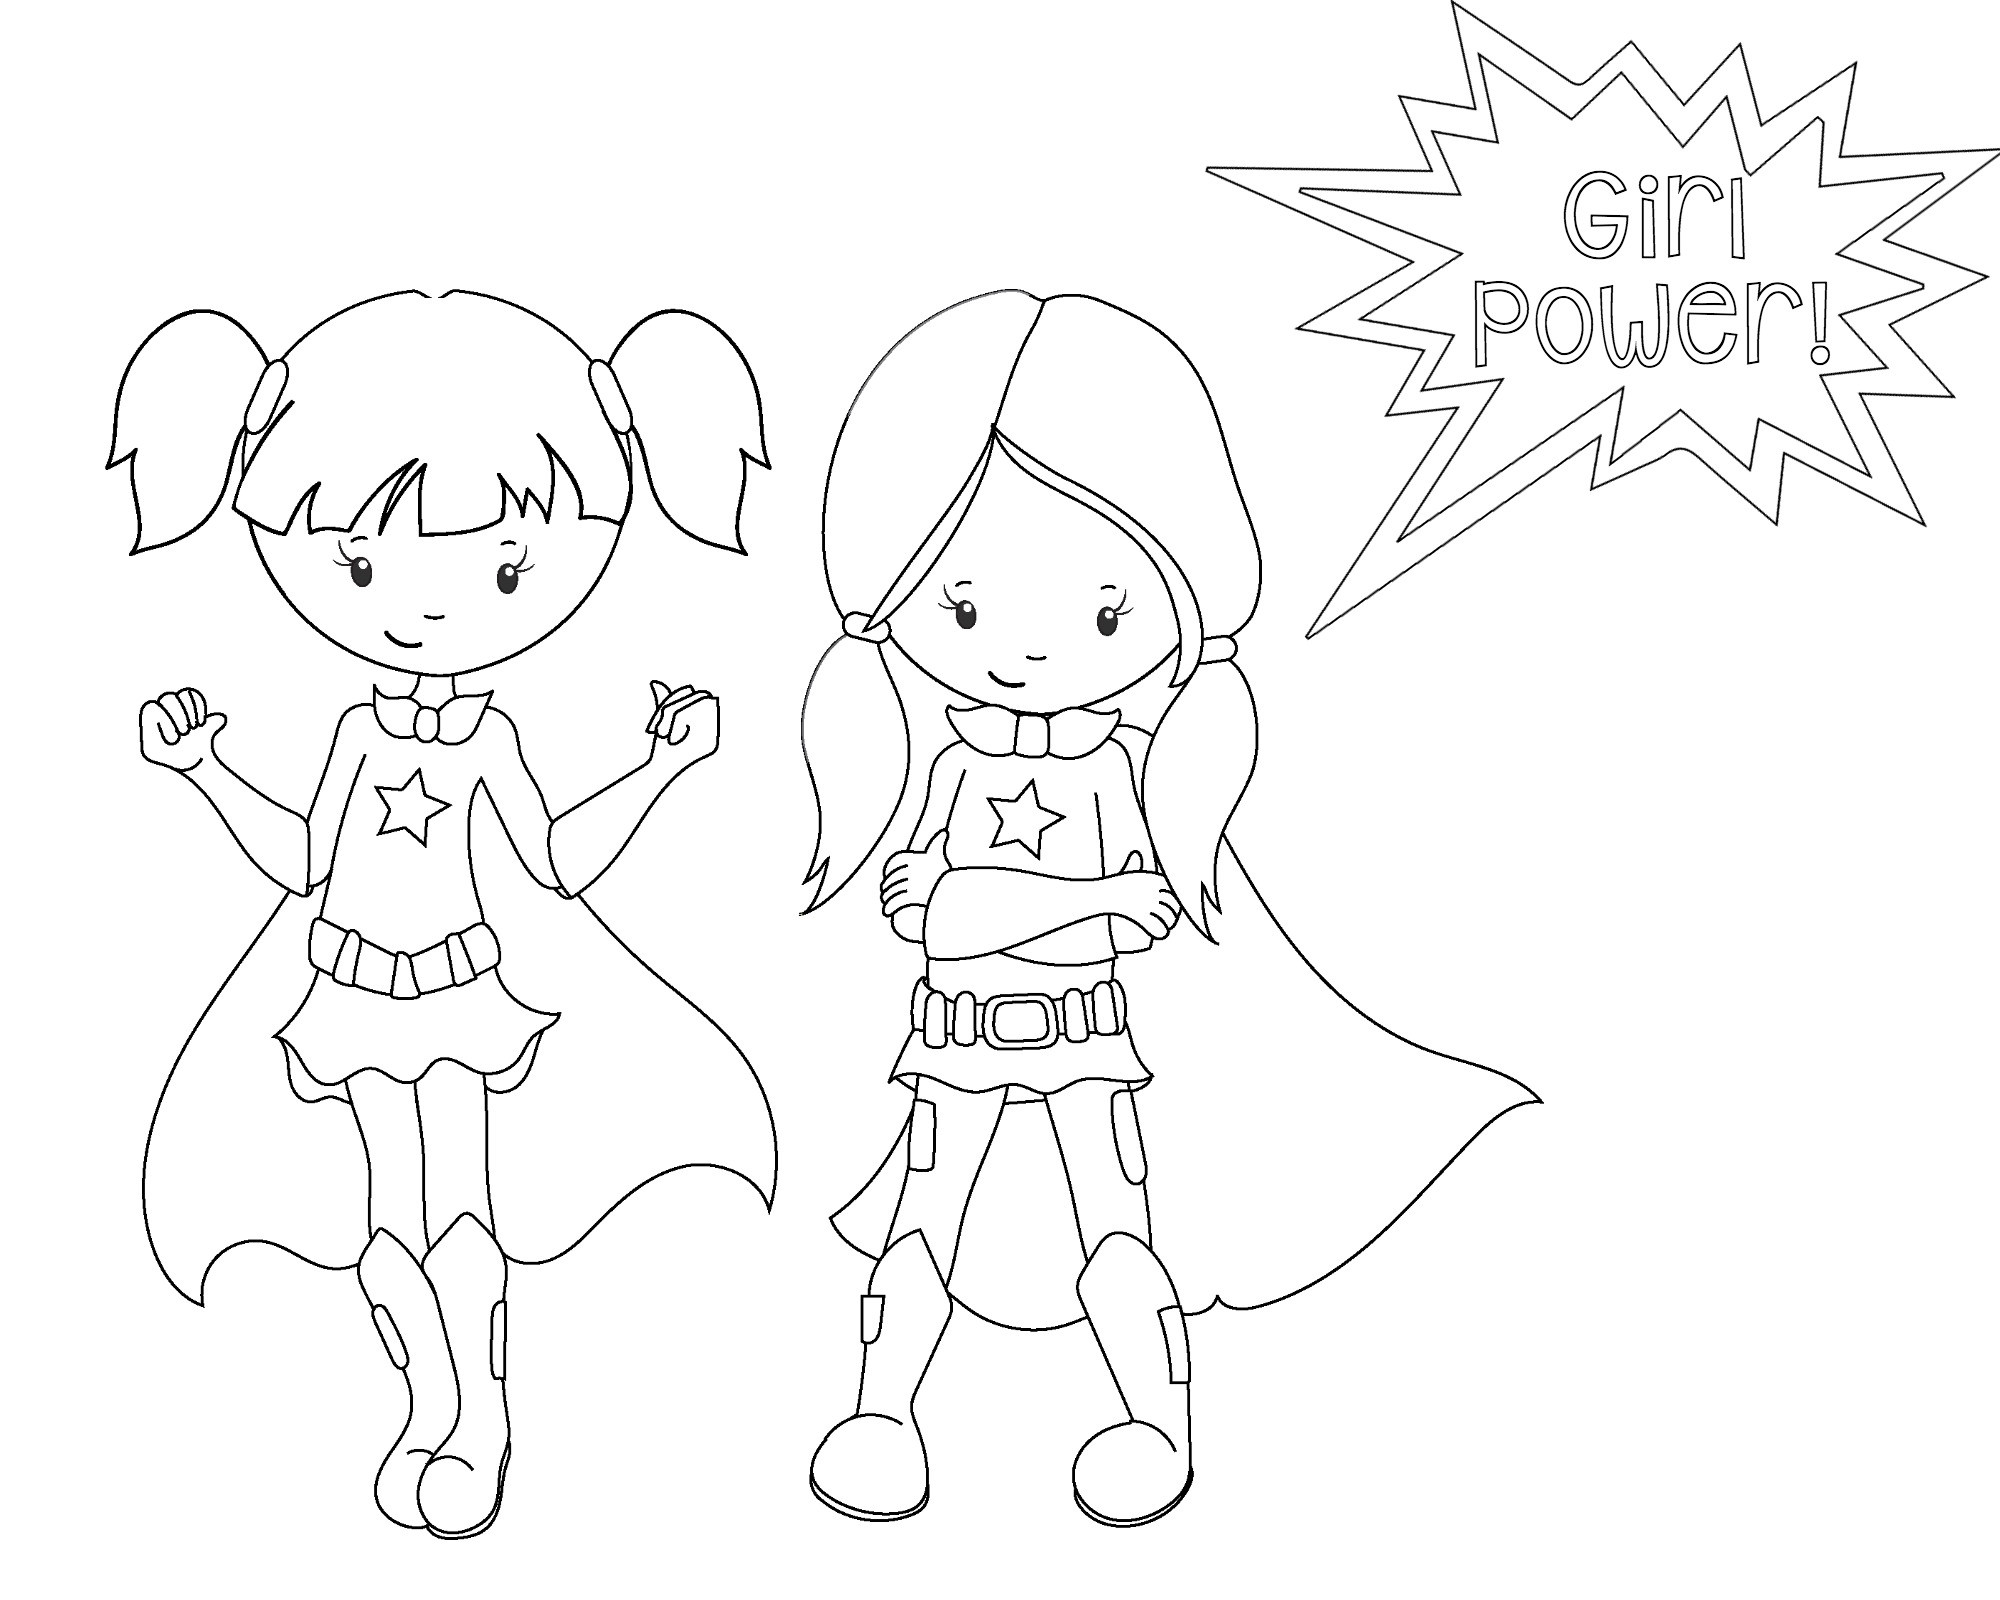 Free Superhero Coloring Pages For Boys Printable
 Superhero Coloring Pages Crazy Little Projects